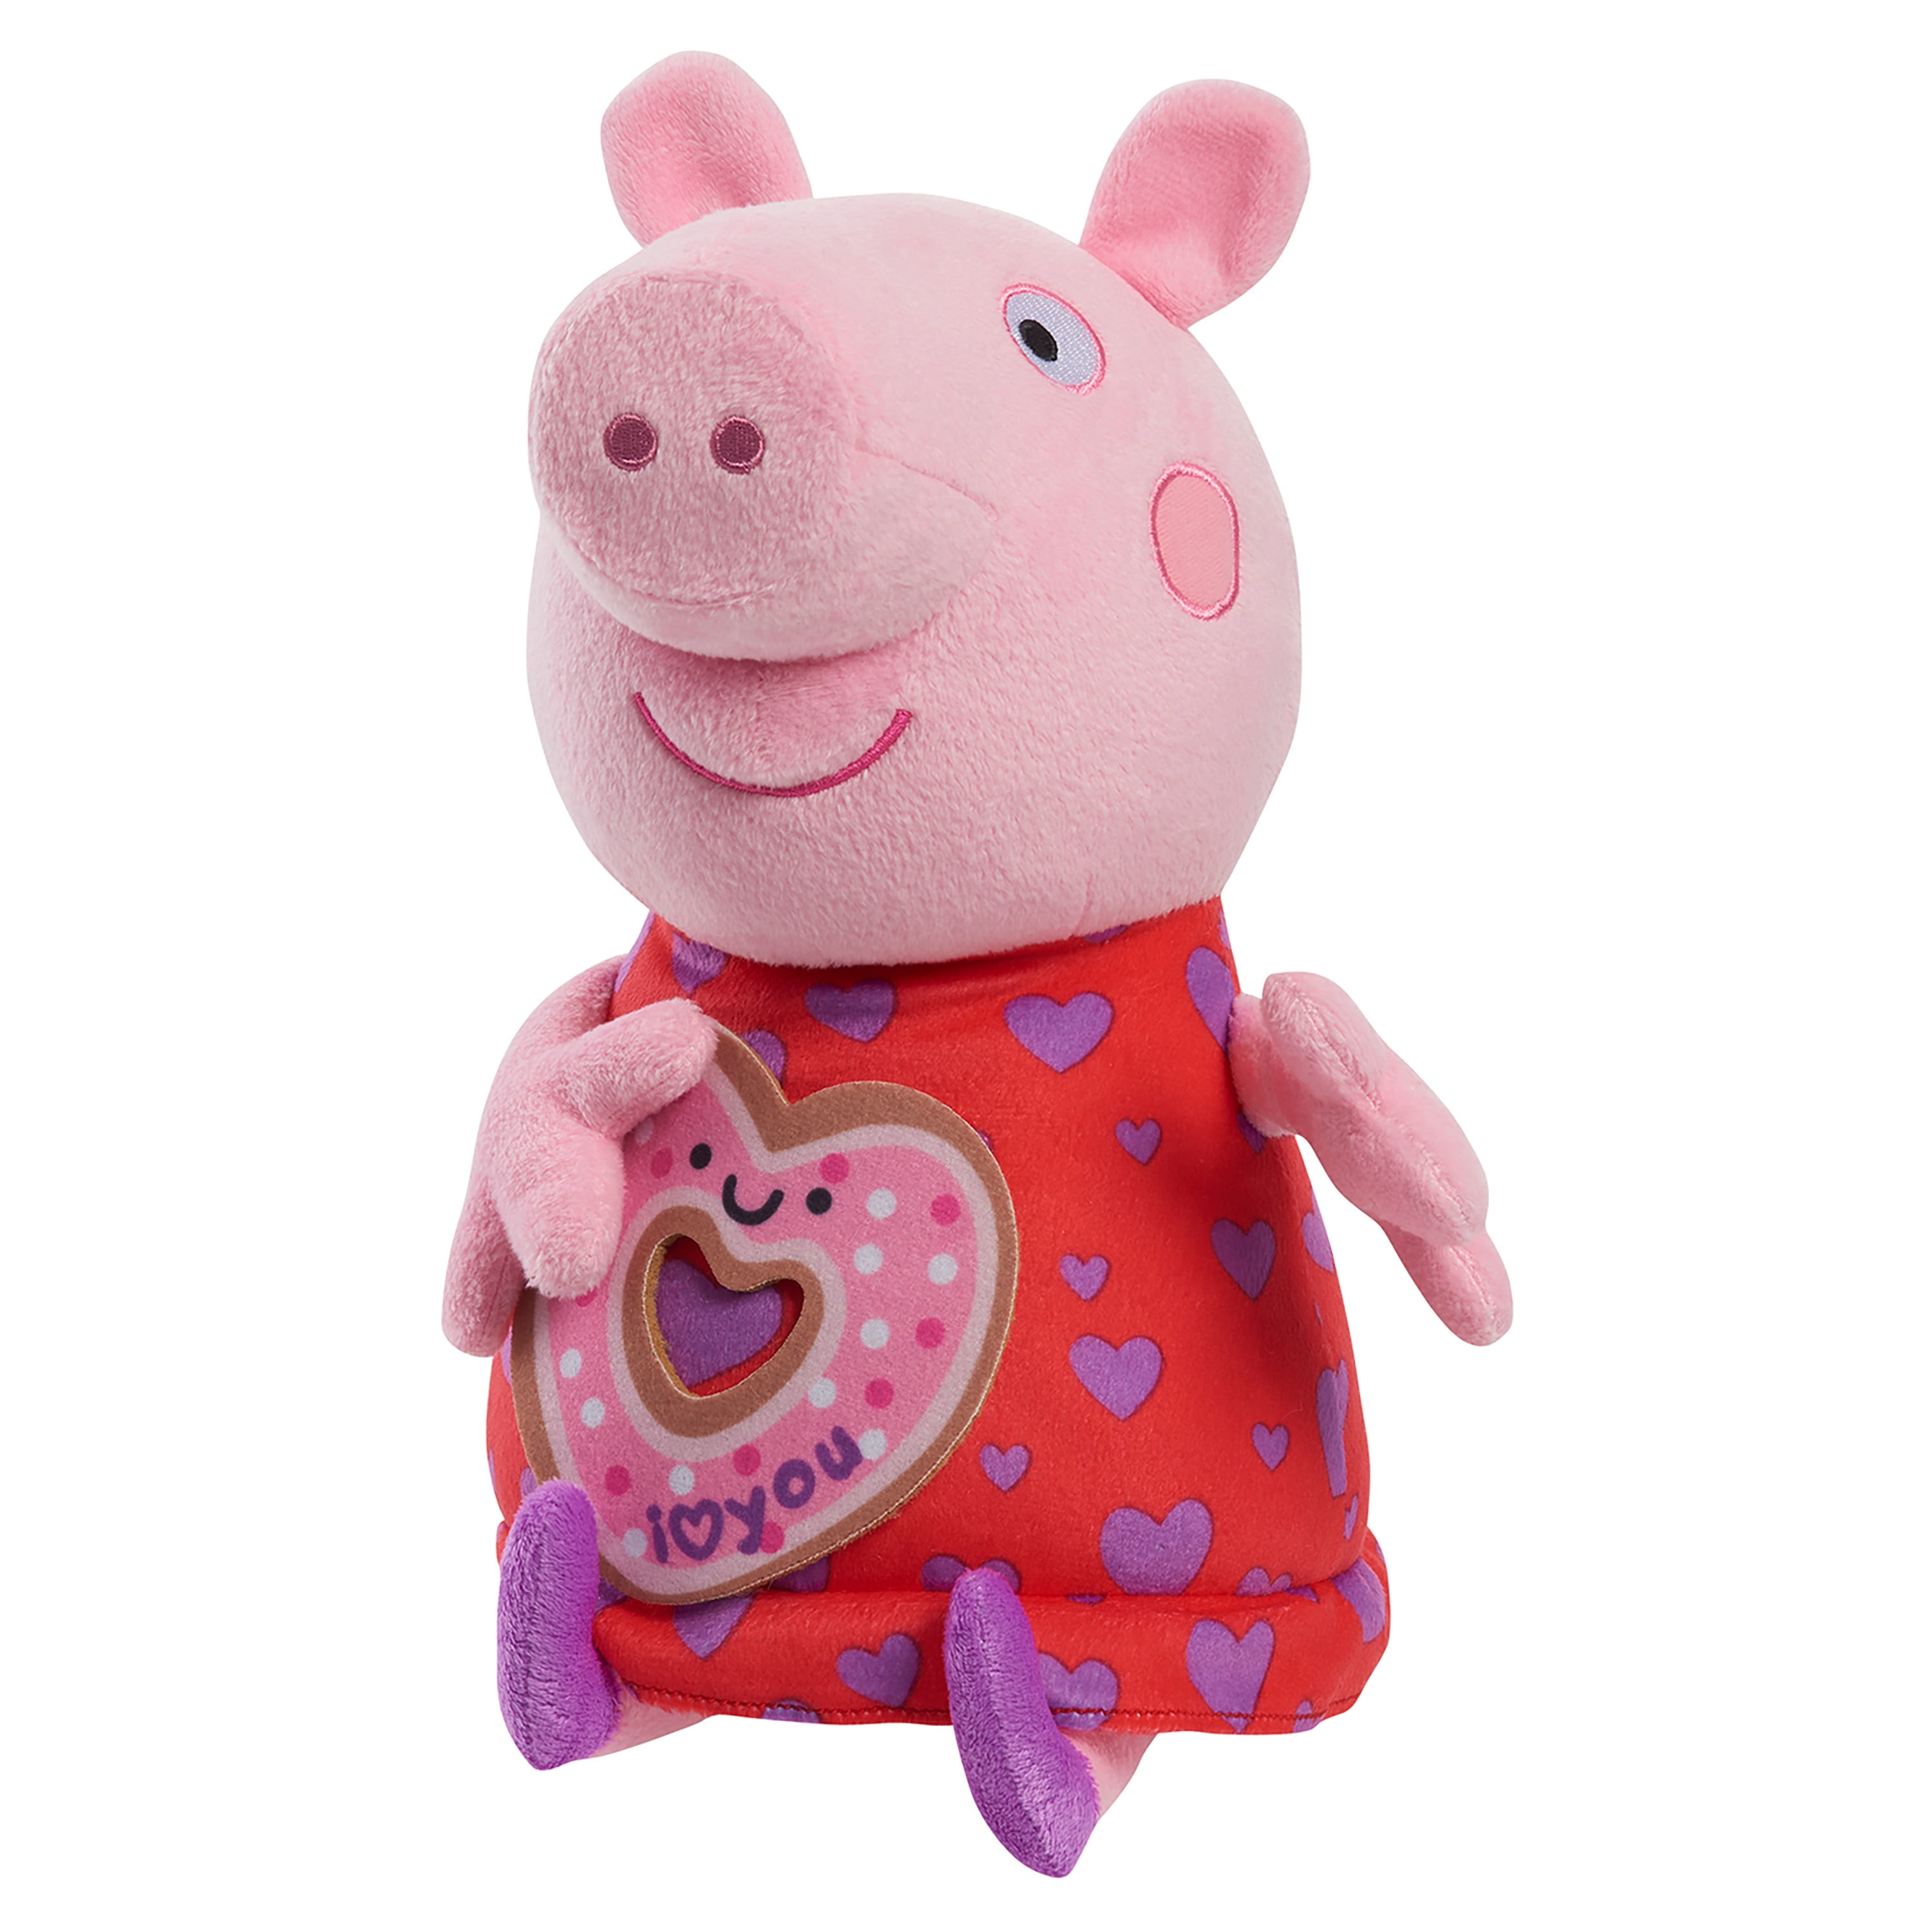 Stuffed　Kids　Large　Valentine's　Plush　Peppa　Presents　Toys　and　for　Pig　Up,　Gifts　Animal,　Ages